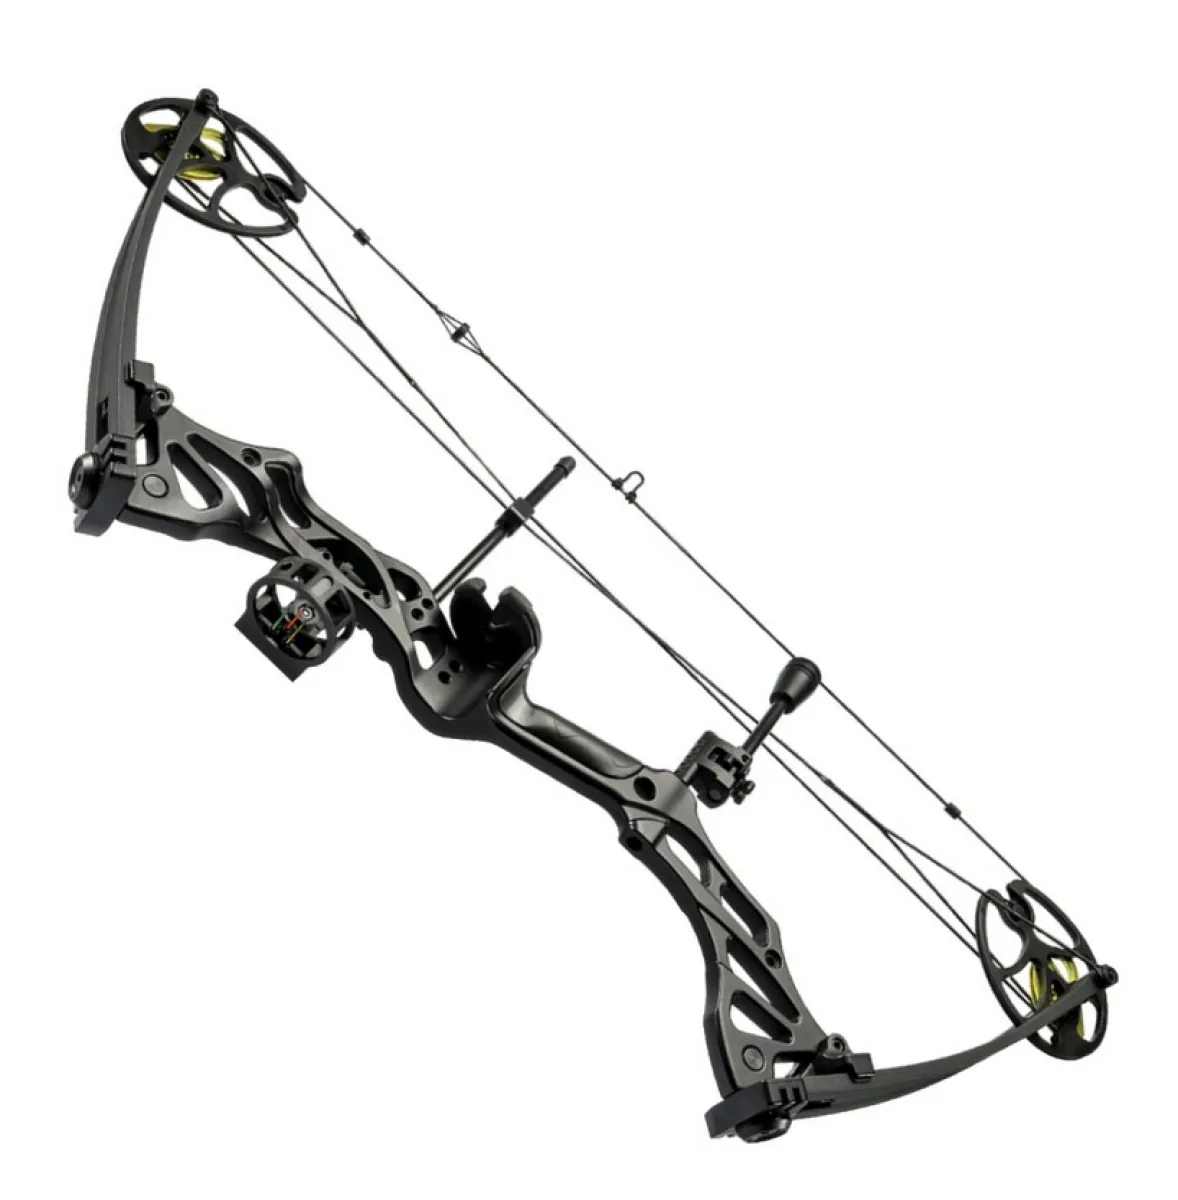 Man Kung Compound Bow "Fossil" 30-70 LBS Black